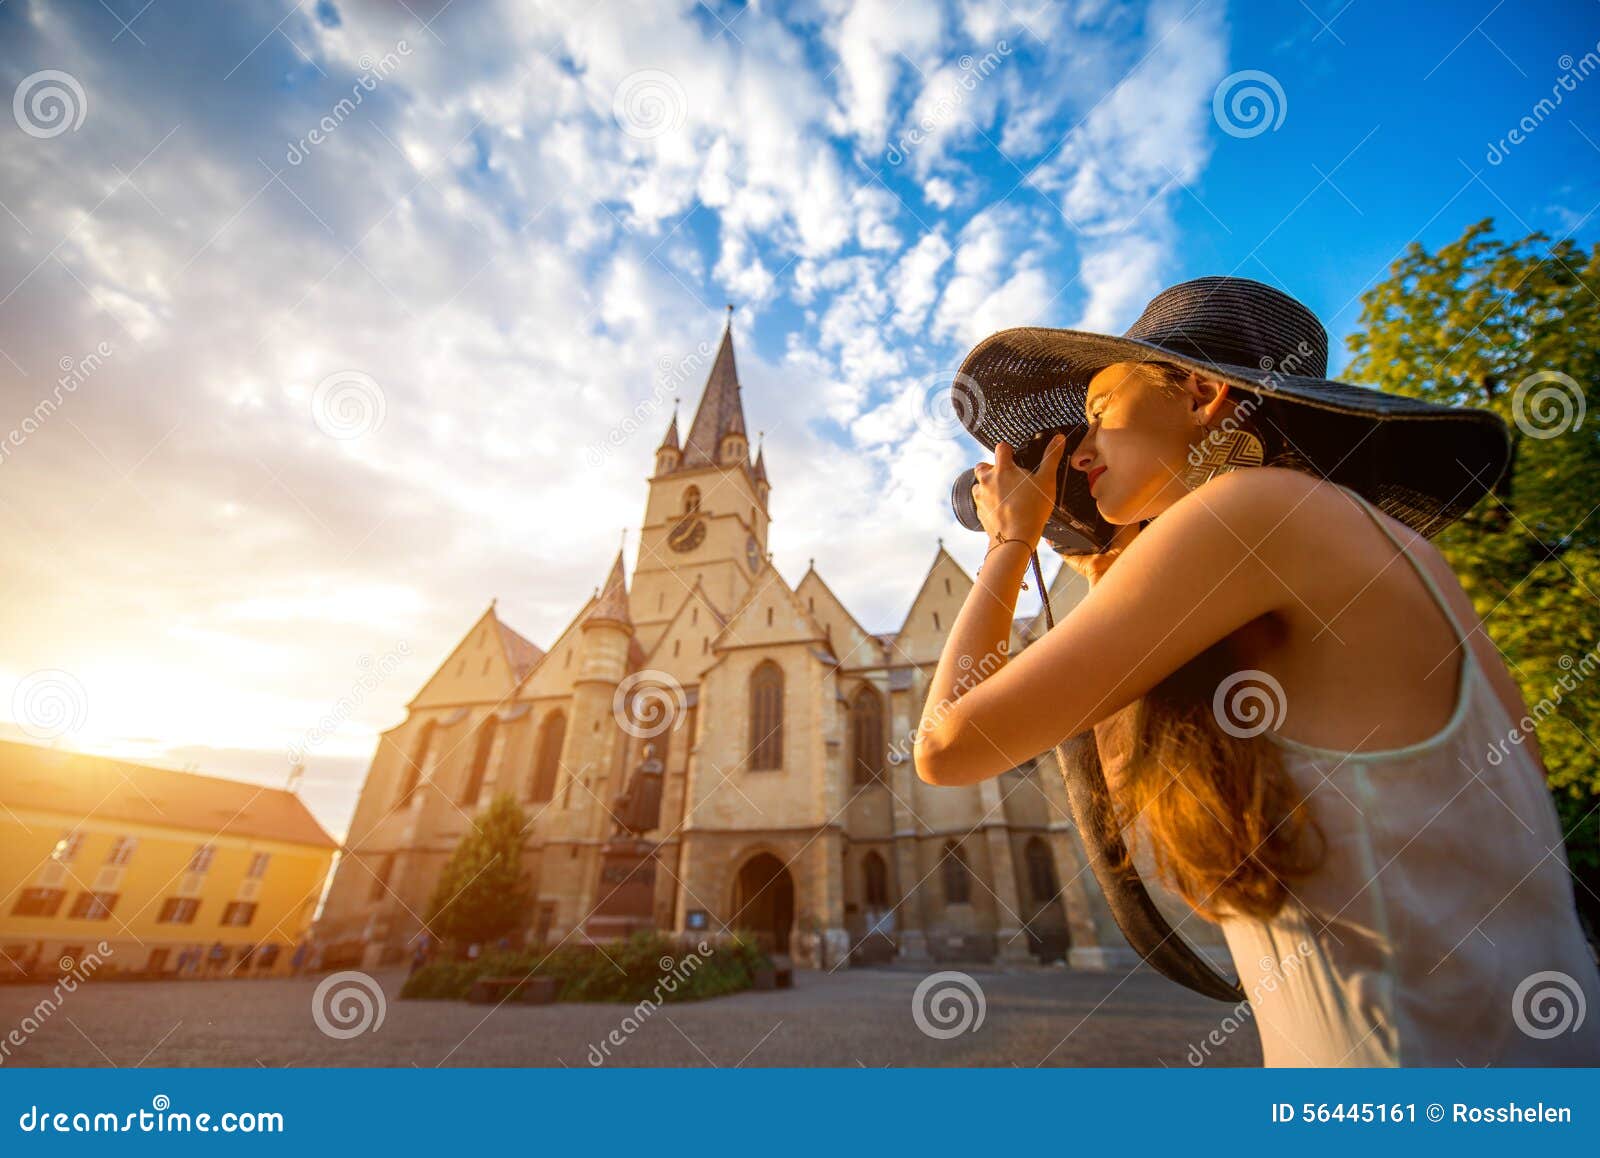 tourist photographing ghotic cathedral in romania